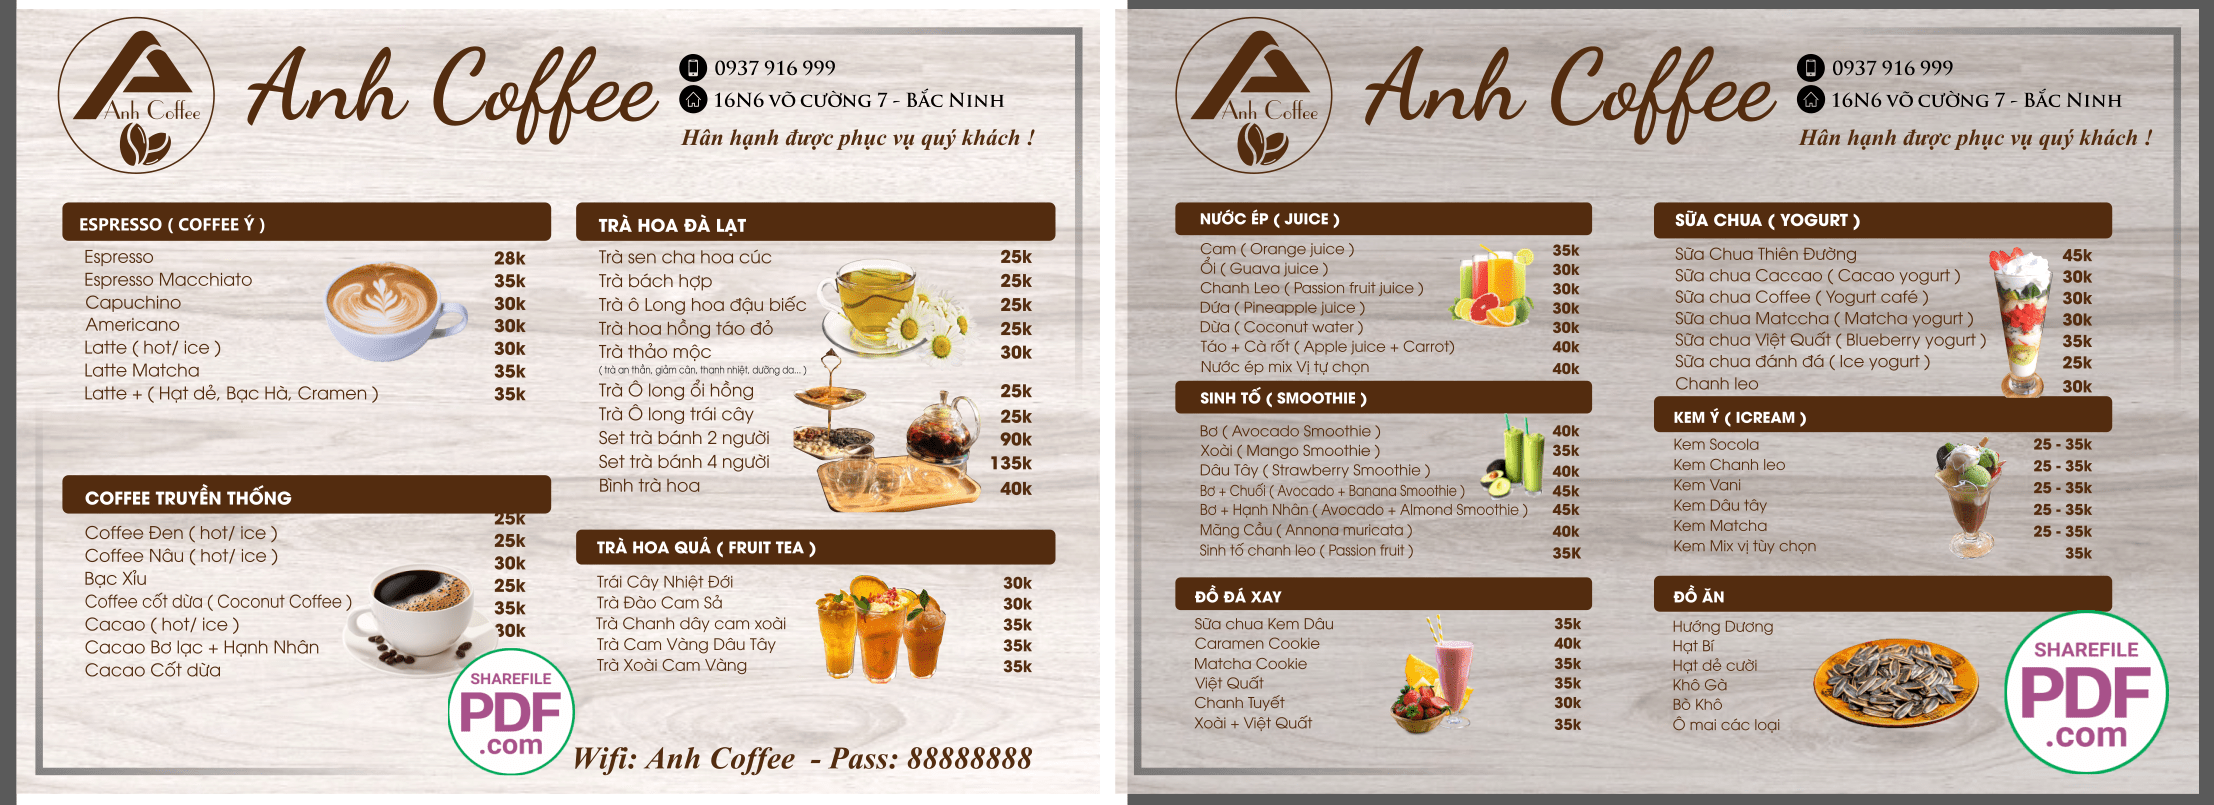 ANH COFFEE - DO UONG 3-min.png